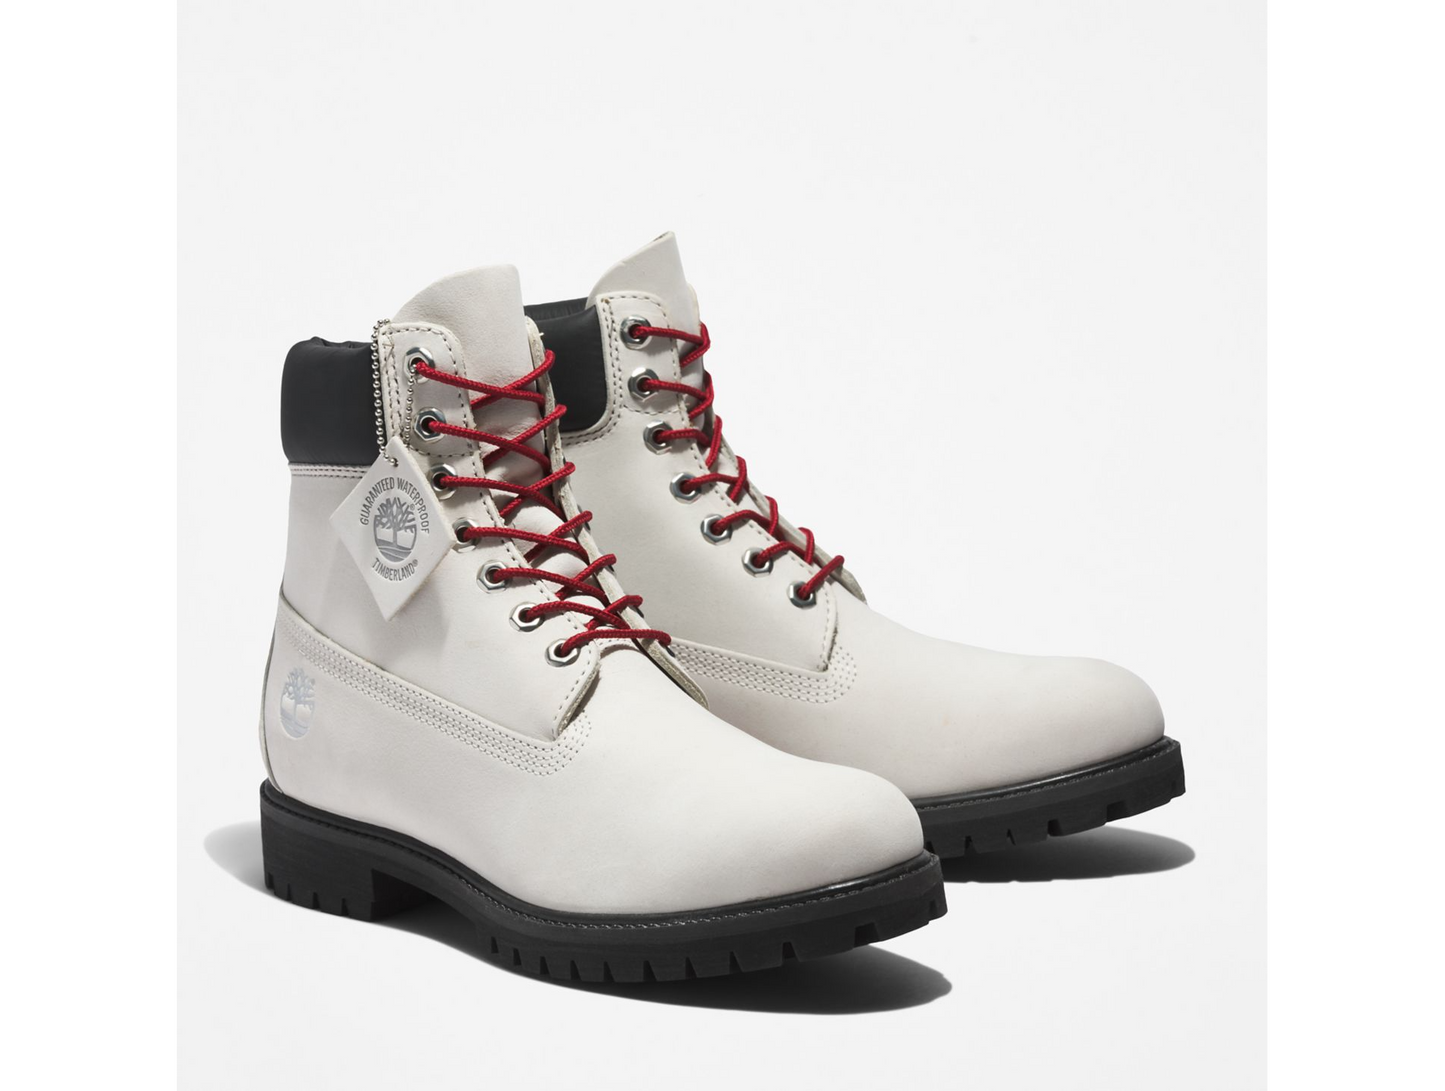 Timberland 6-Inch Premium Waterproof Boots - Color: Grey Nubuck/Red - (TB010061) - TIG - R2L17